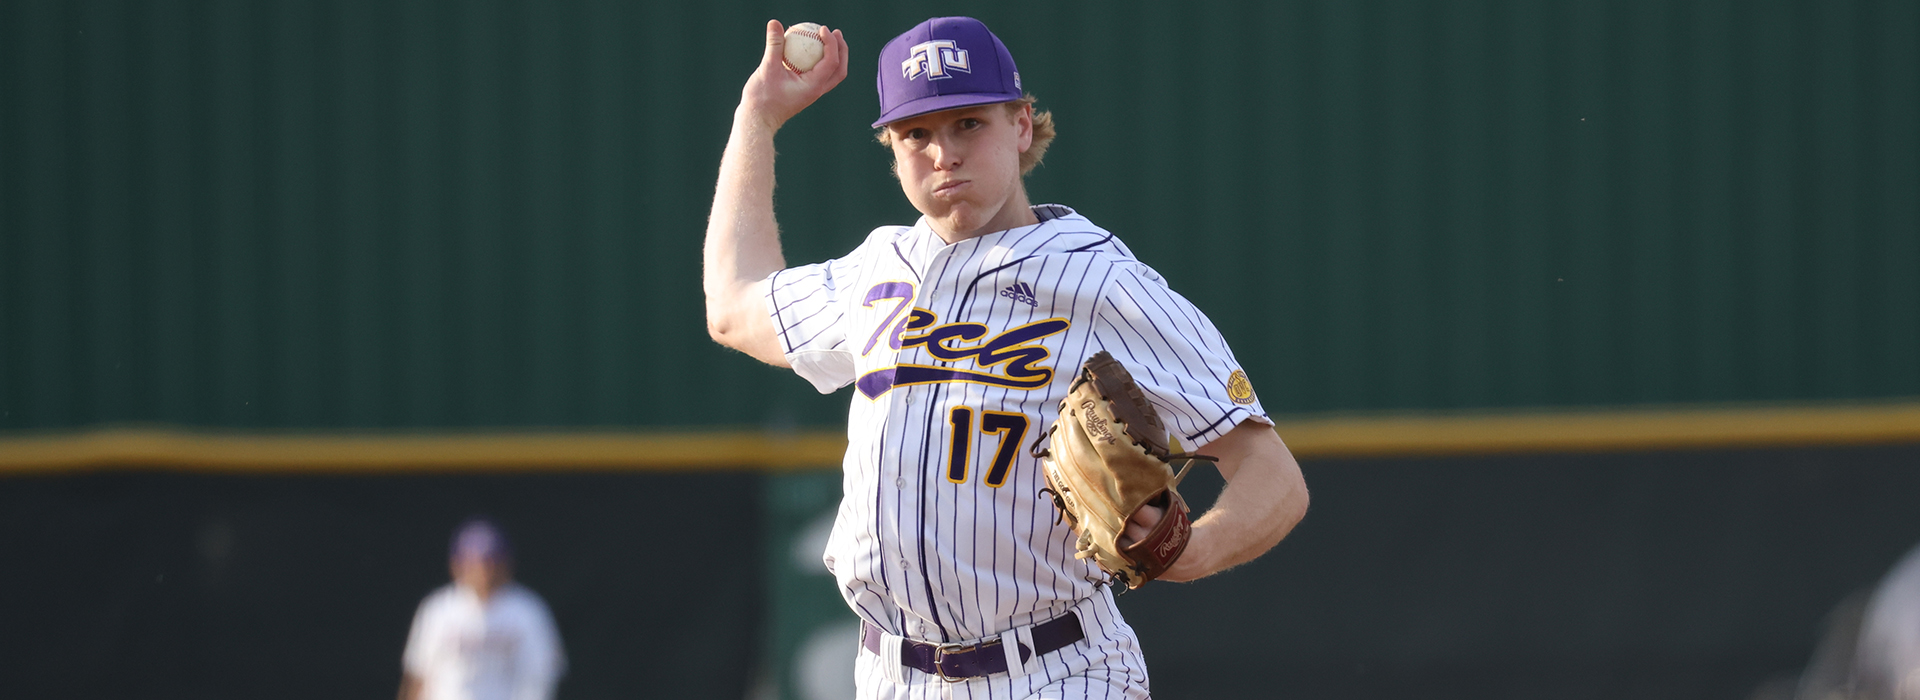 Calitri's 10-inning gem leads to OVC Pitcher of the Week honors